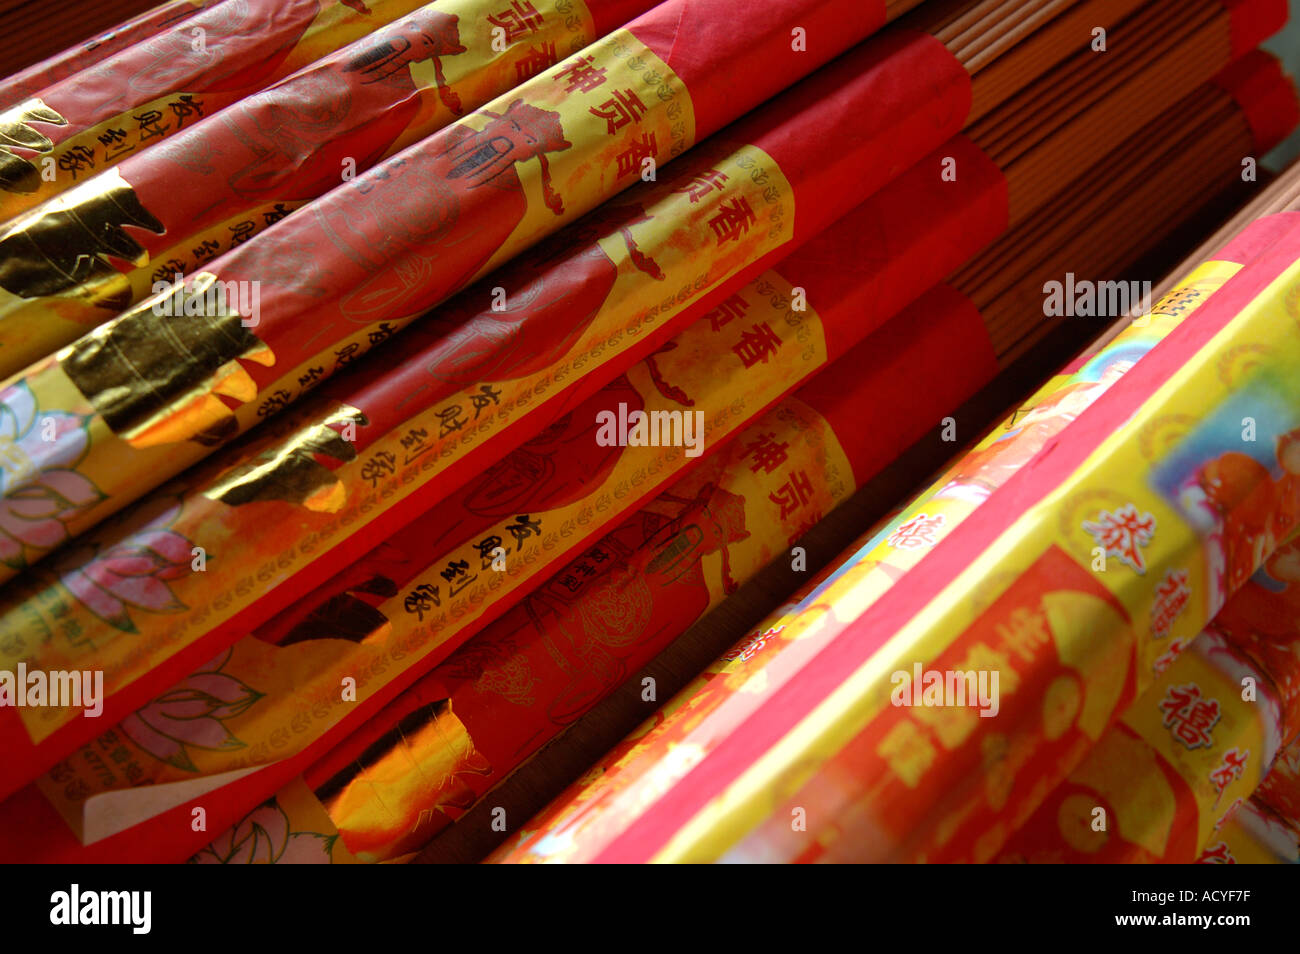 Packs of Chinese incense sticks wrapped in red and gold paper. For sale at market in Suzhou, China. Stock Photo